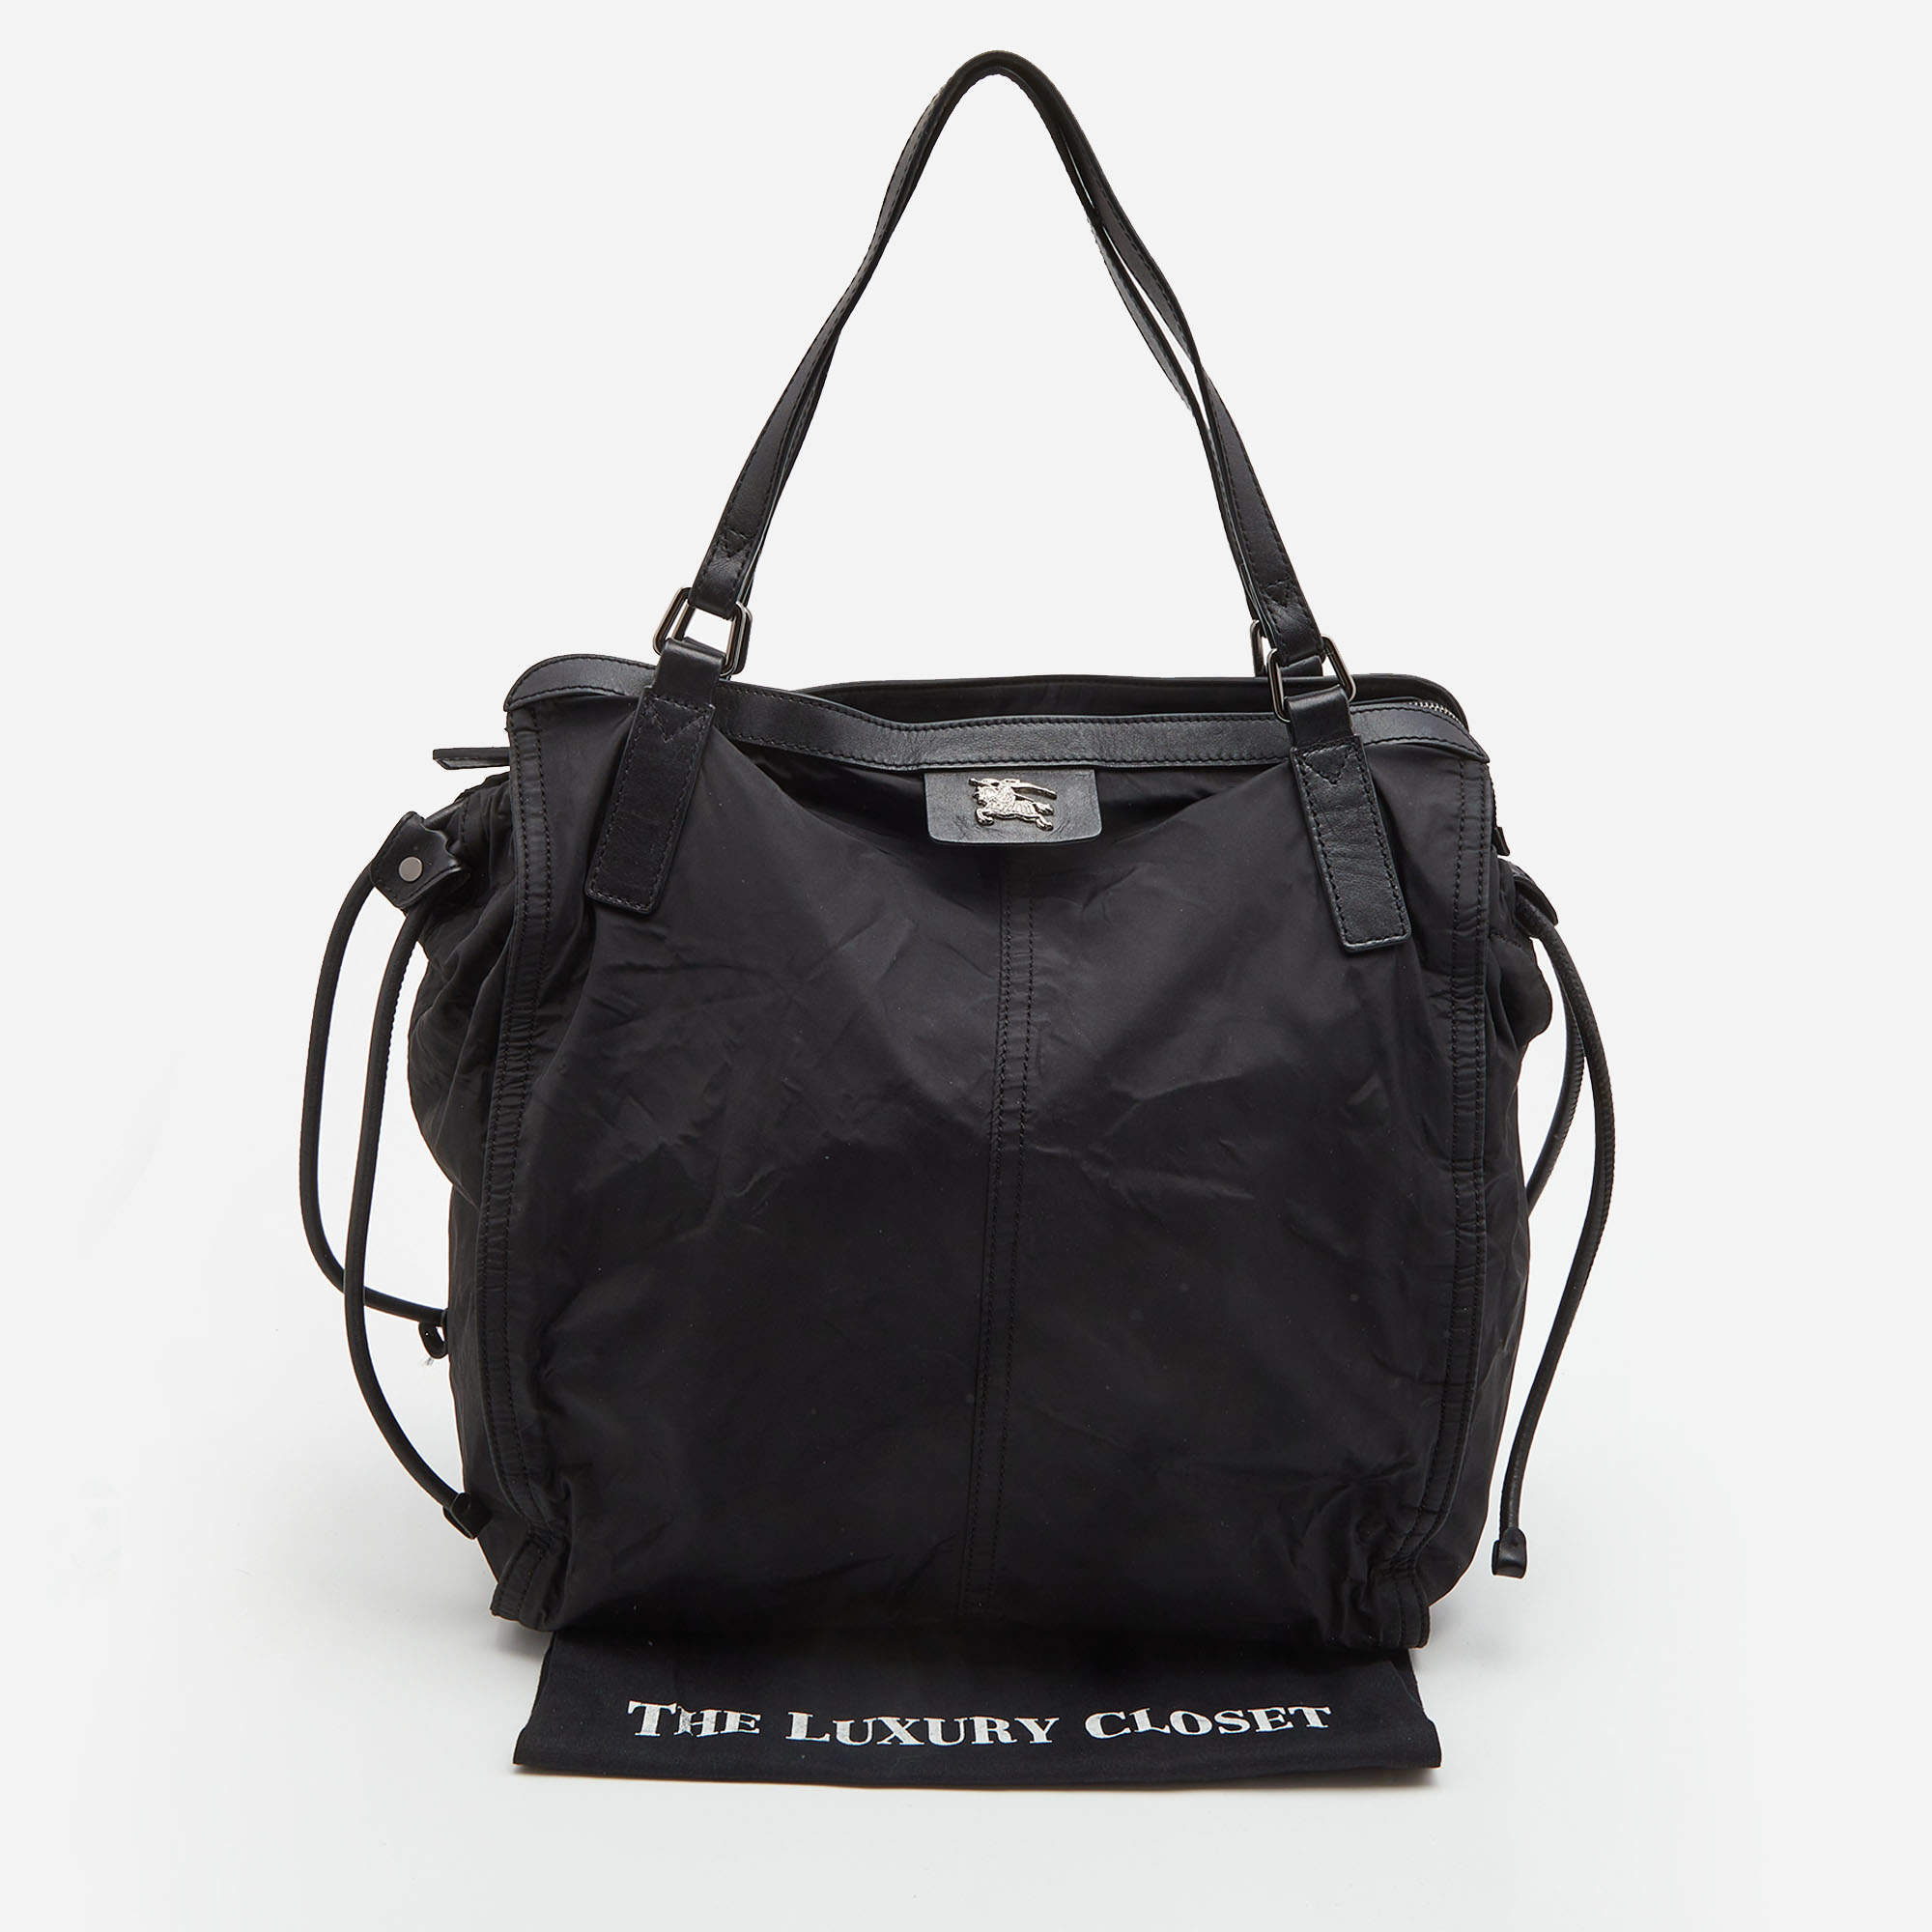 Burberry Black Nylon and Leather Buckleigh Tote Burberry